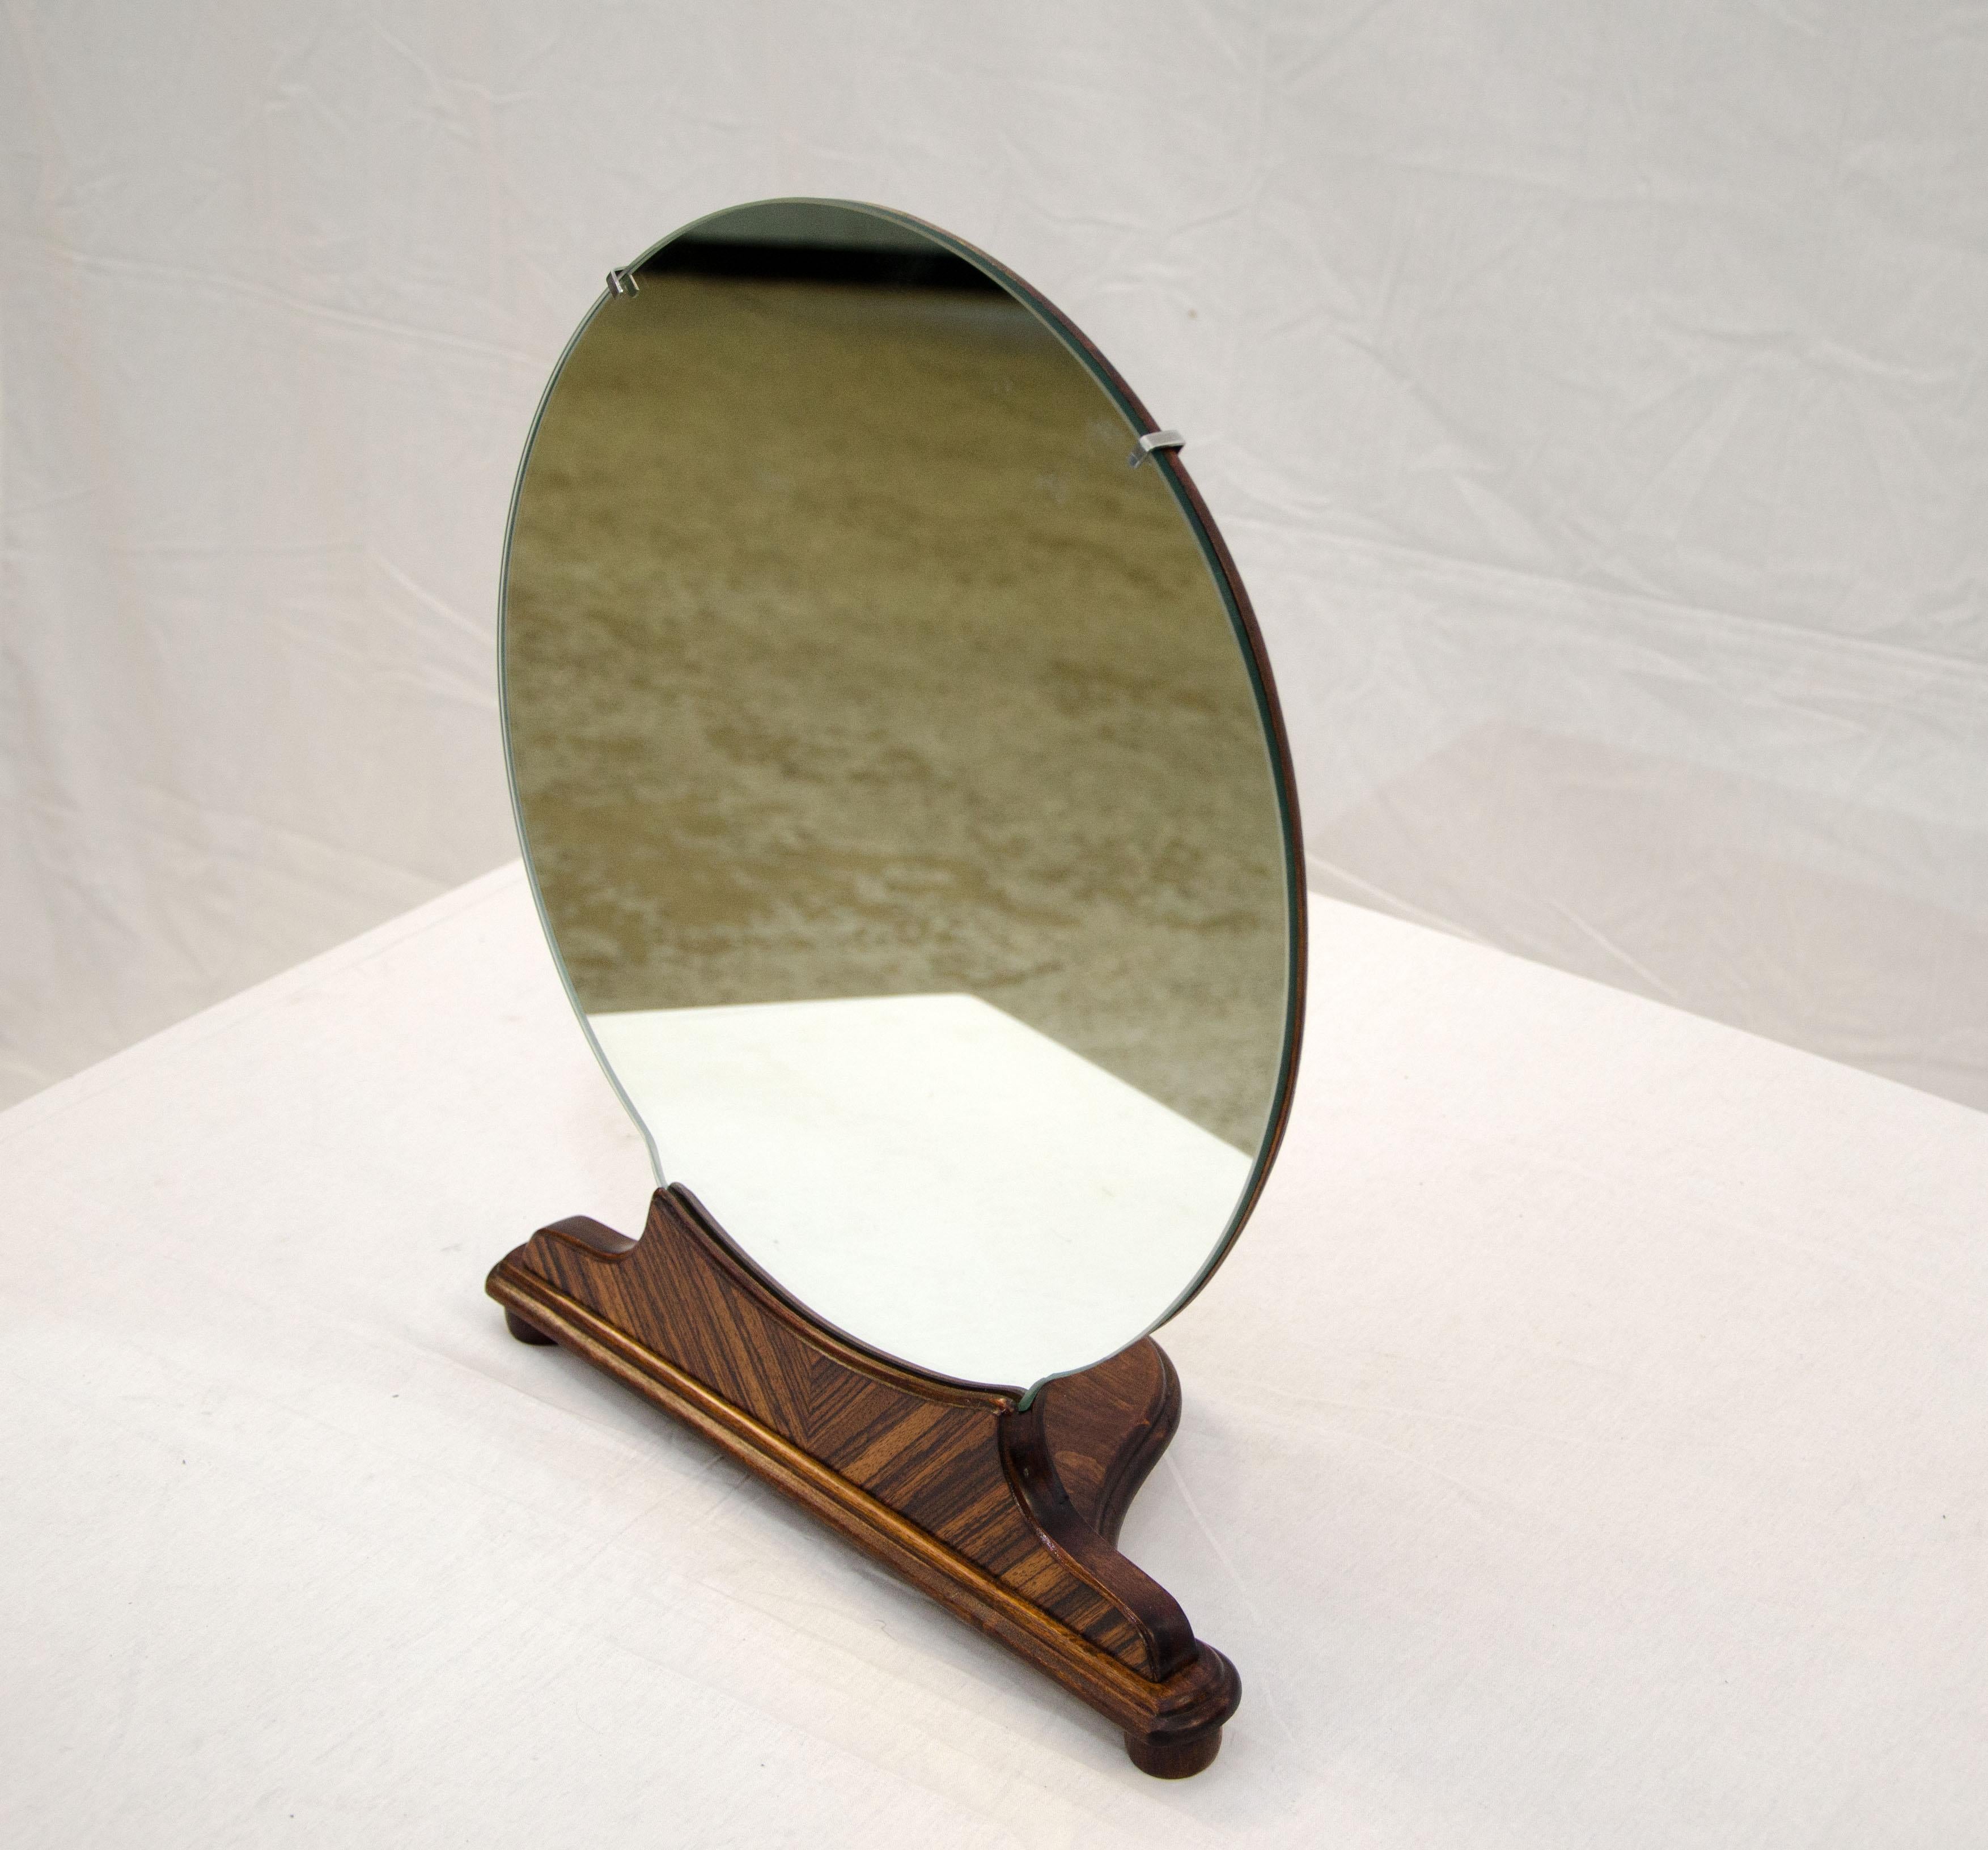 This small walnut freestanding mirror was made to be used on top of an Art Deco high-boy dresser. It is supported by three ball feet on a wooden framework and has a book-matched walnut decorative grain pattern on the front. The mirror itself is 15